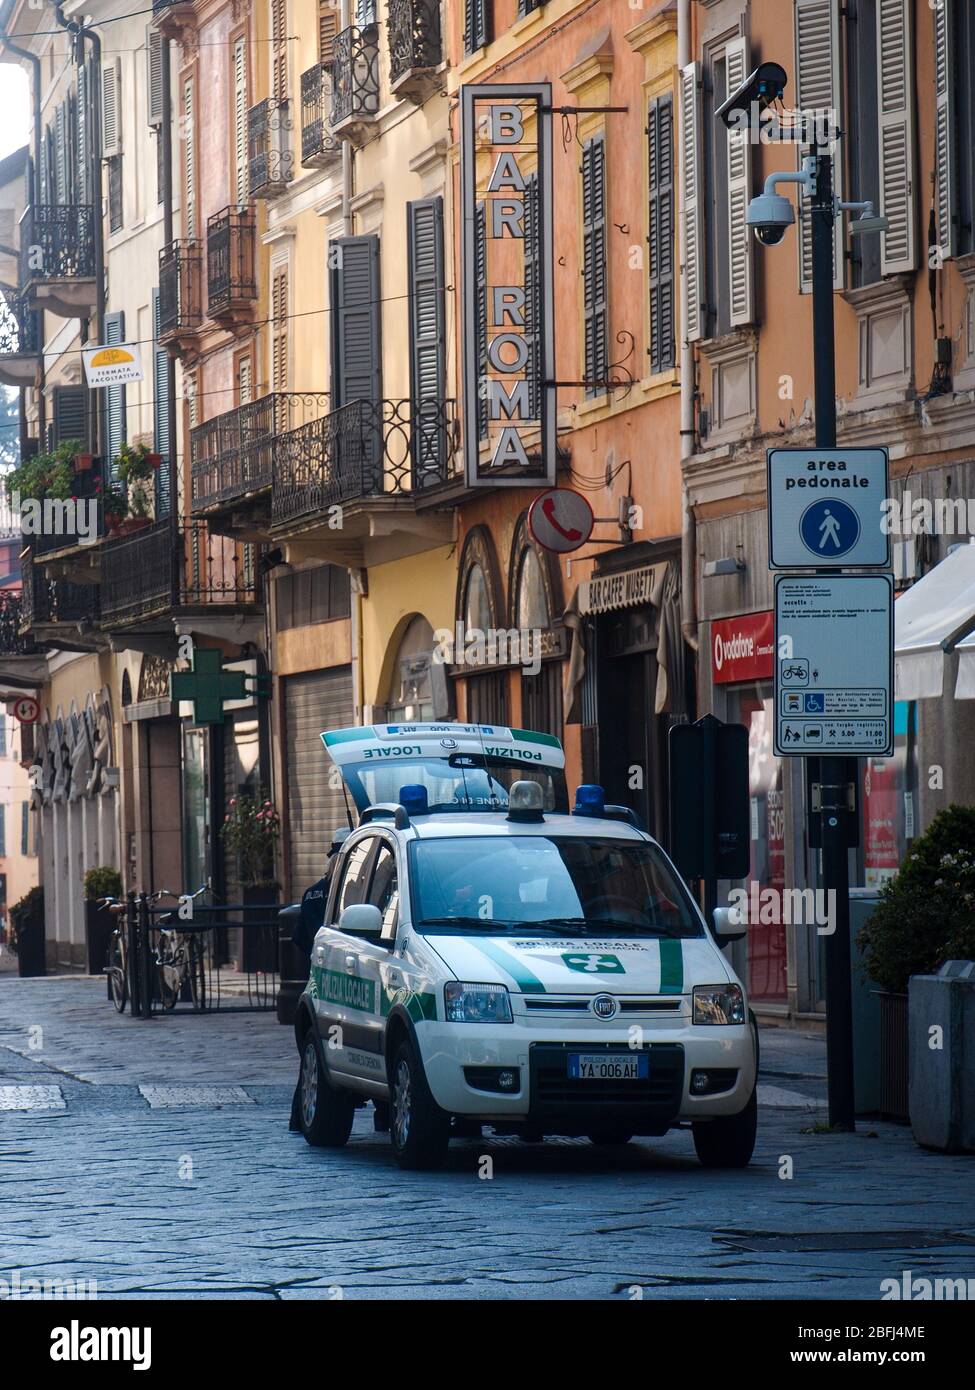 Cremona, Lombardy, Italy - April 19th 2020 -  local Police control , everyday life during covid-19 lockdown outbreak. Stock Photo